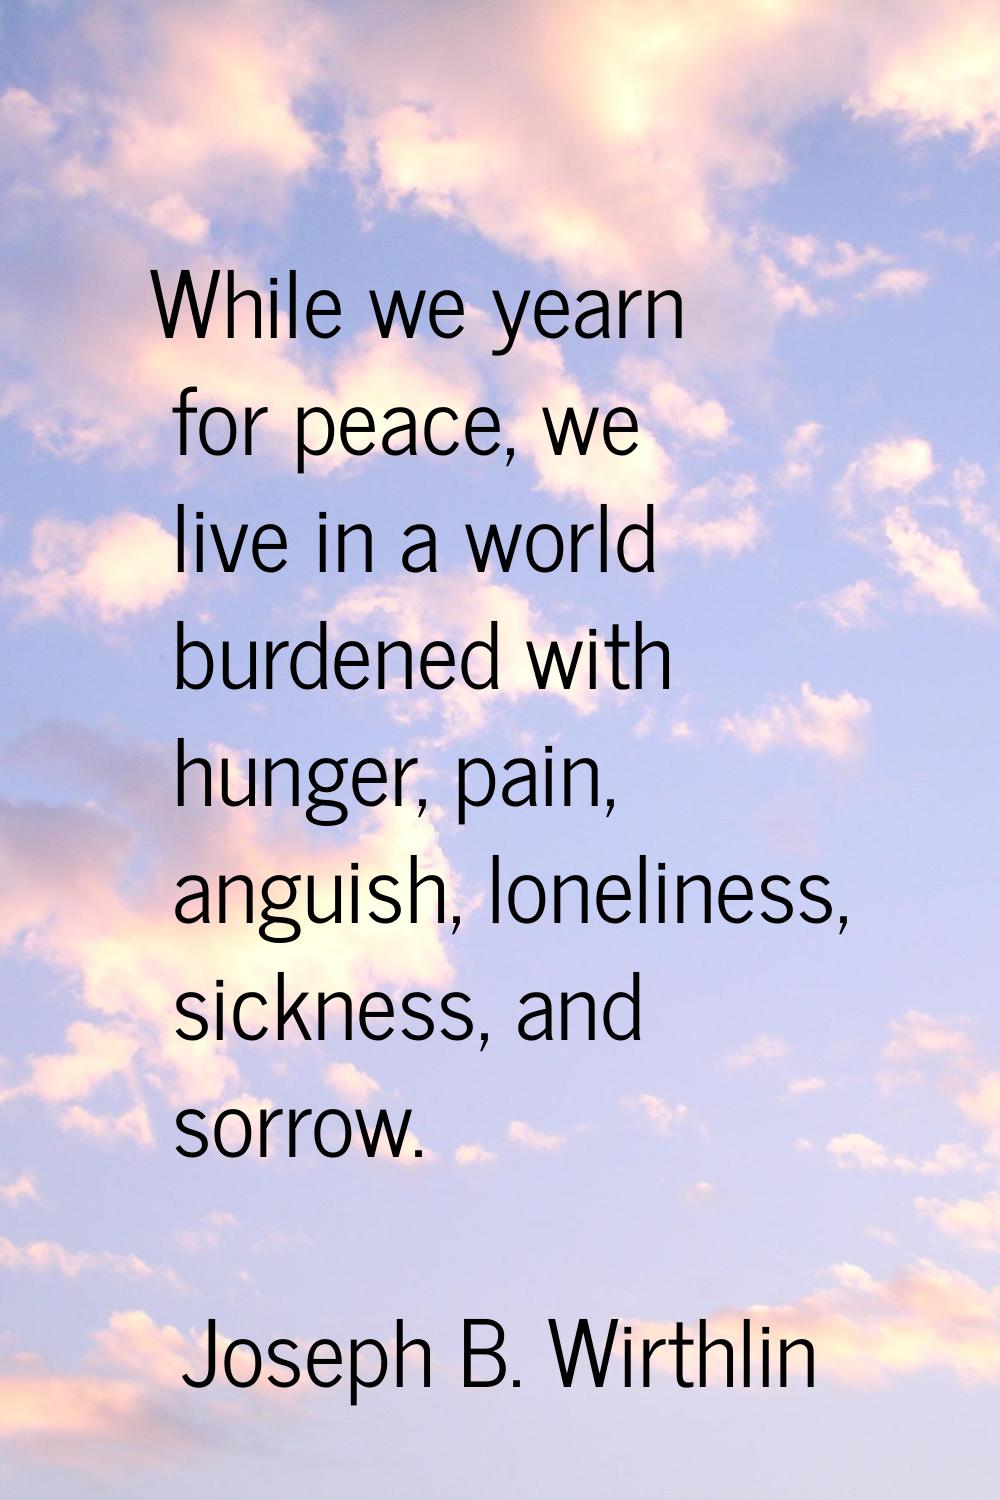 While we yearn for peace, we live in a world burdened with hunger, pain, anguish, loneliness, sickn